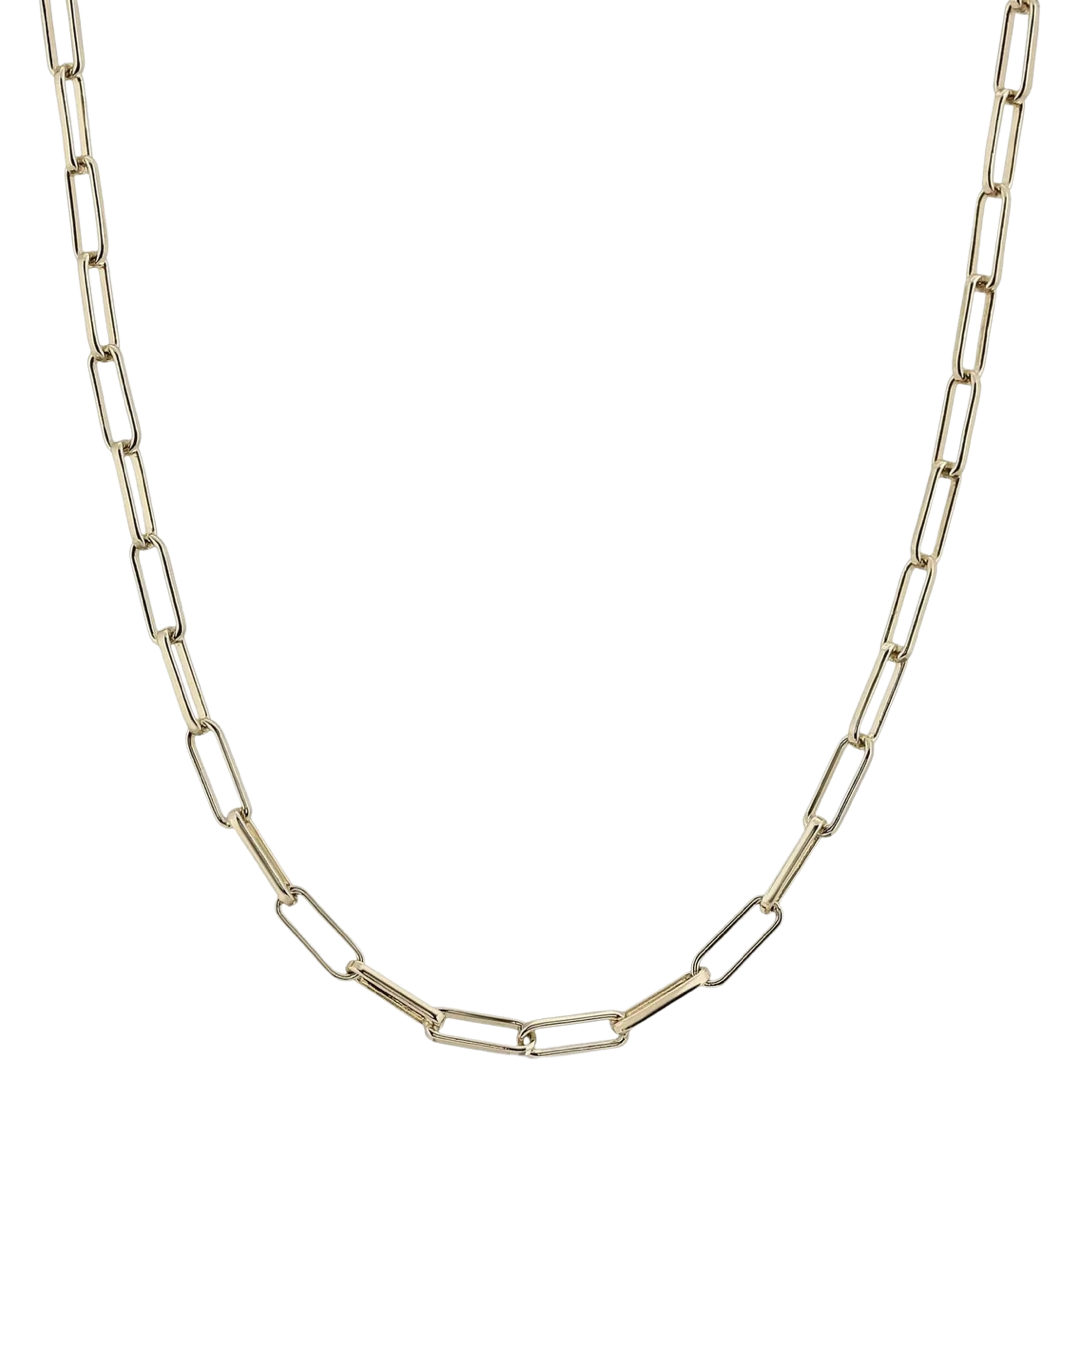 Elongated Link Chain in Gold 30"